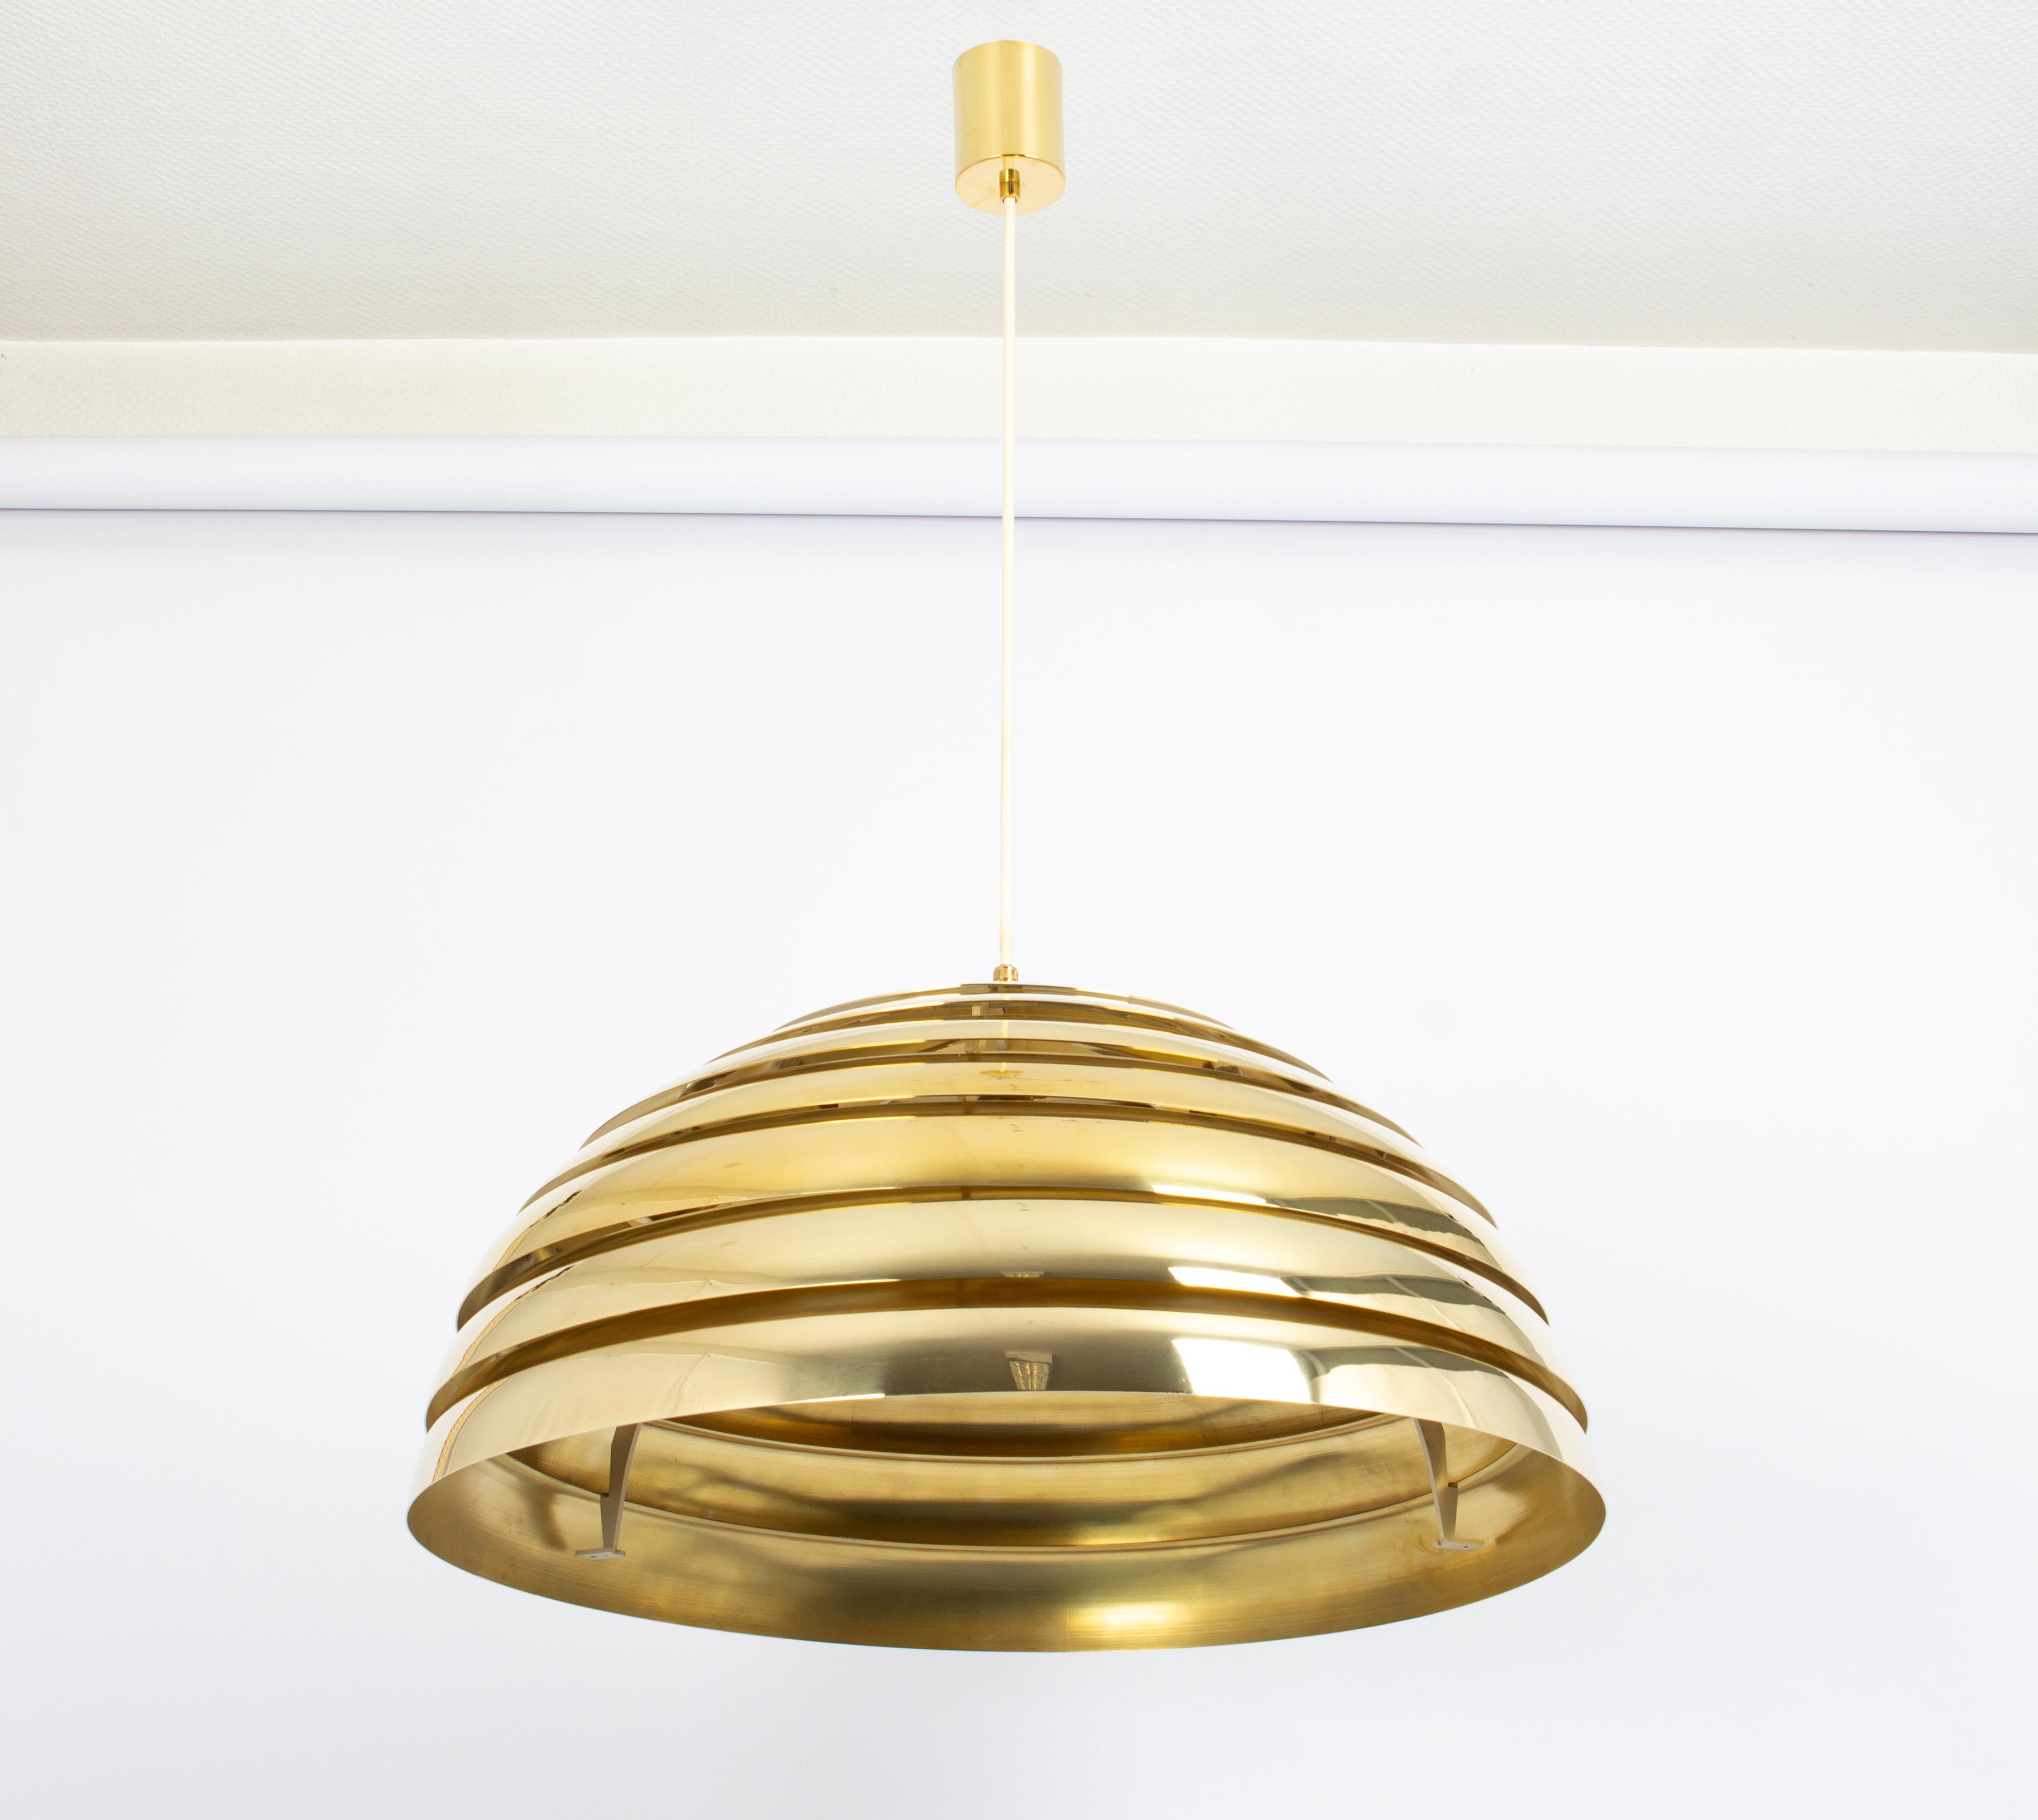 Large brass pendant light designed by Florian Schulz, Germany, 1970s.

High quality and in very good condition. Cleaned, well-wired and ready to use. 

The fixture requires one standard bulb
Light bulbs are not included. It is possible to install